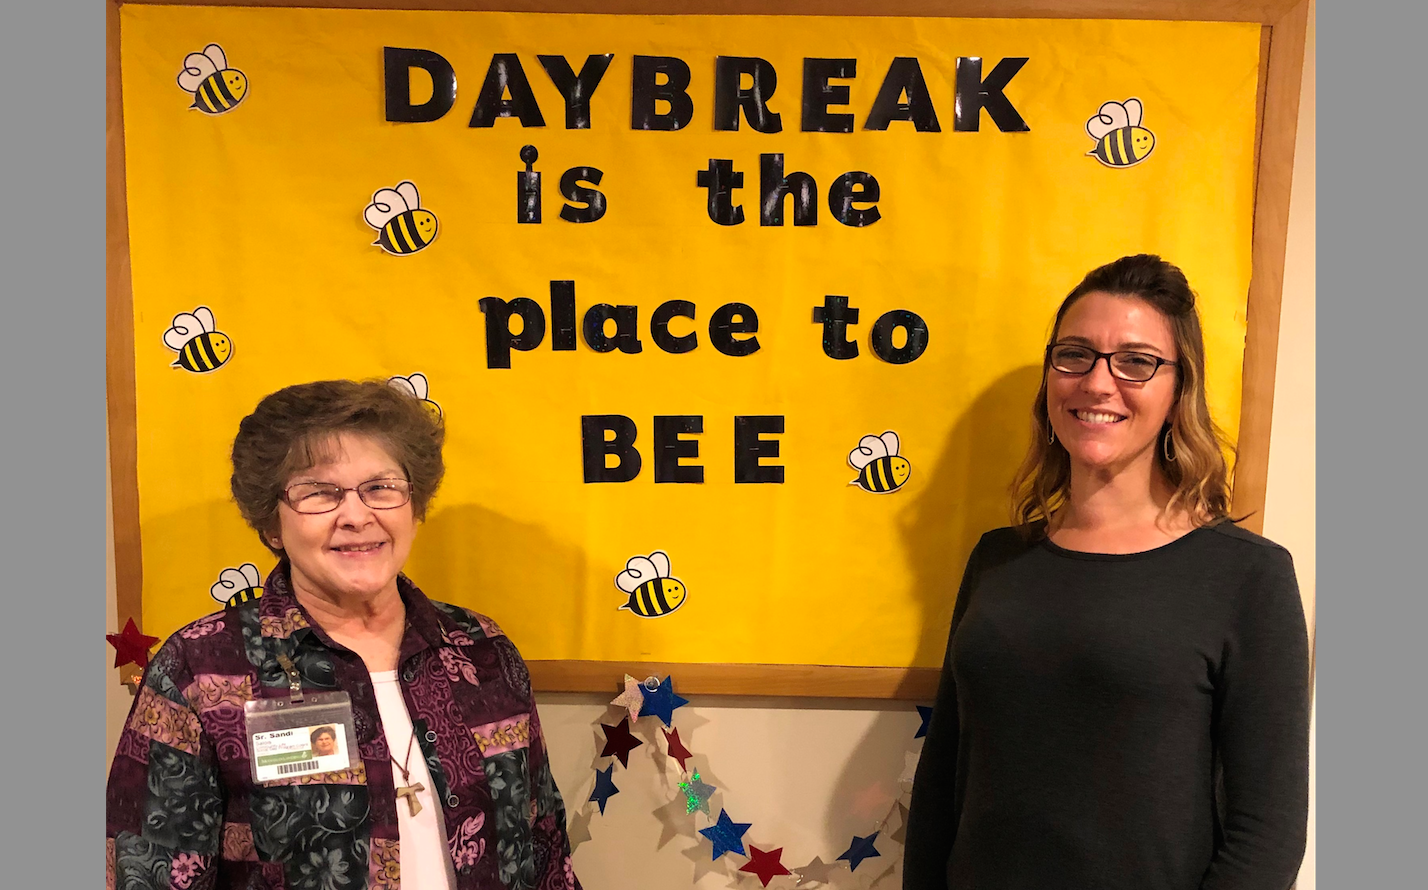 Two women pose in front of a photo that says Daybreak is the place to BEE